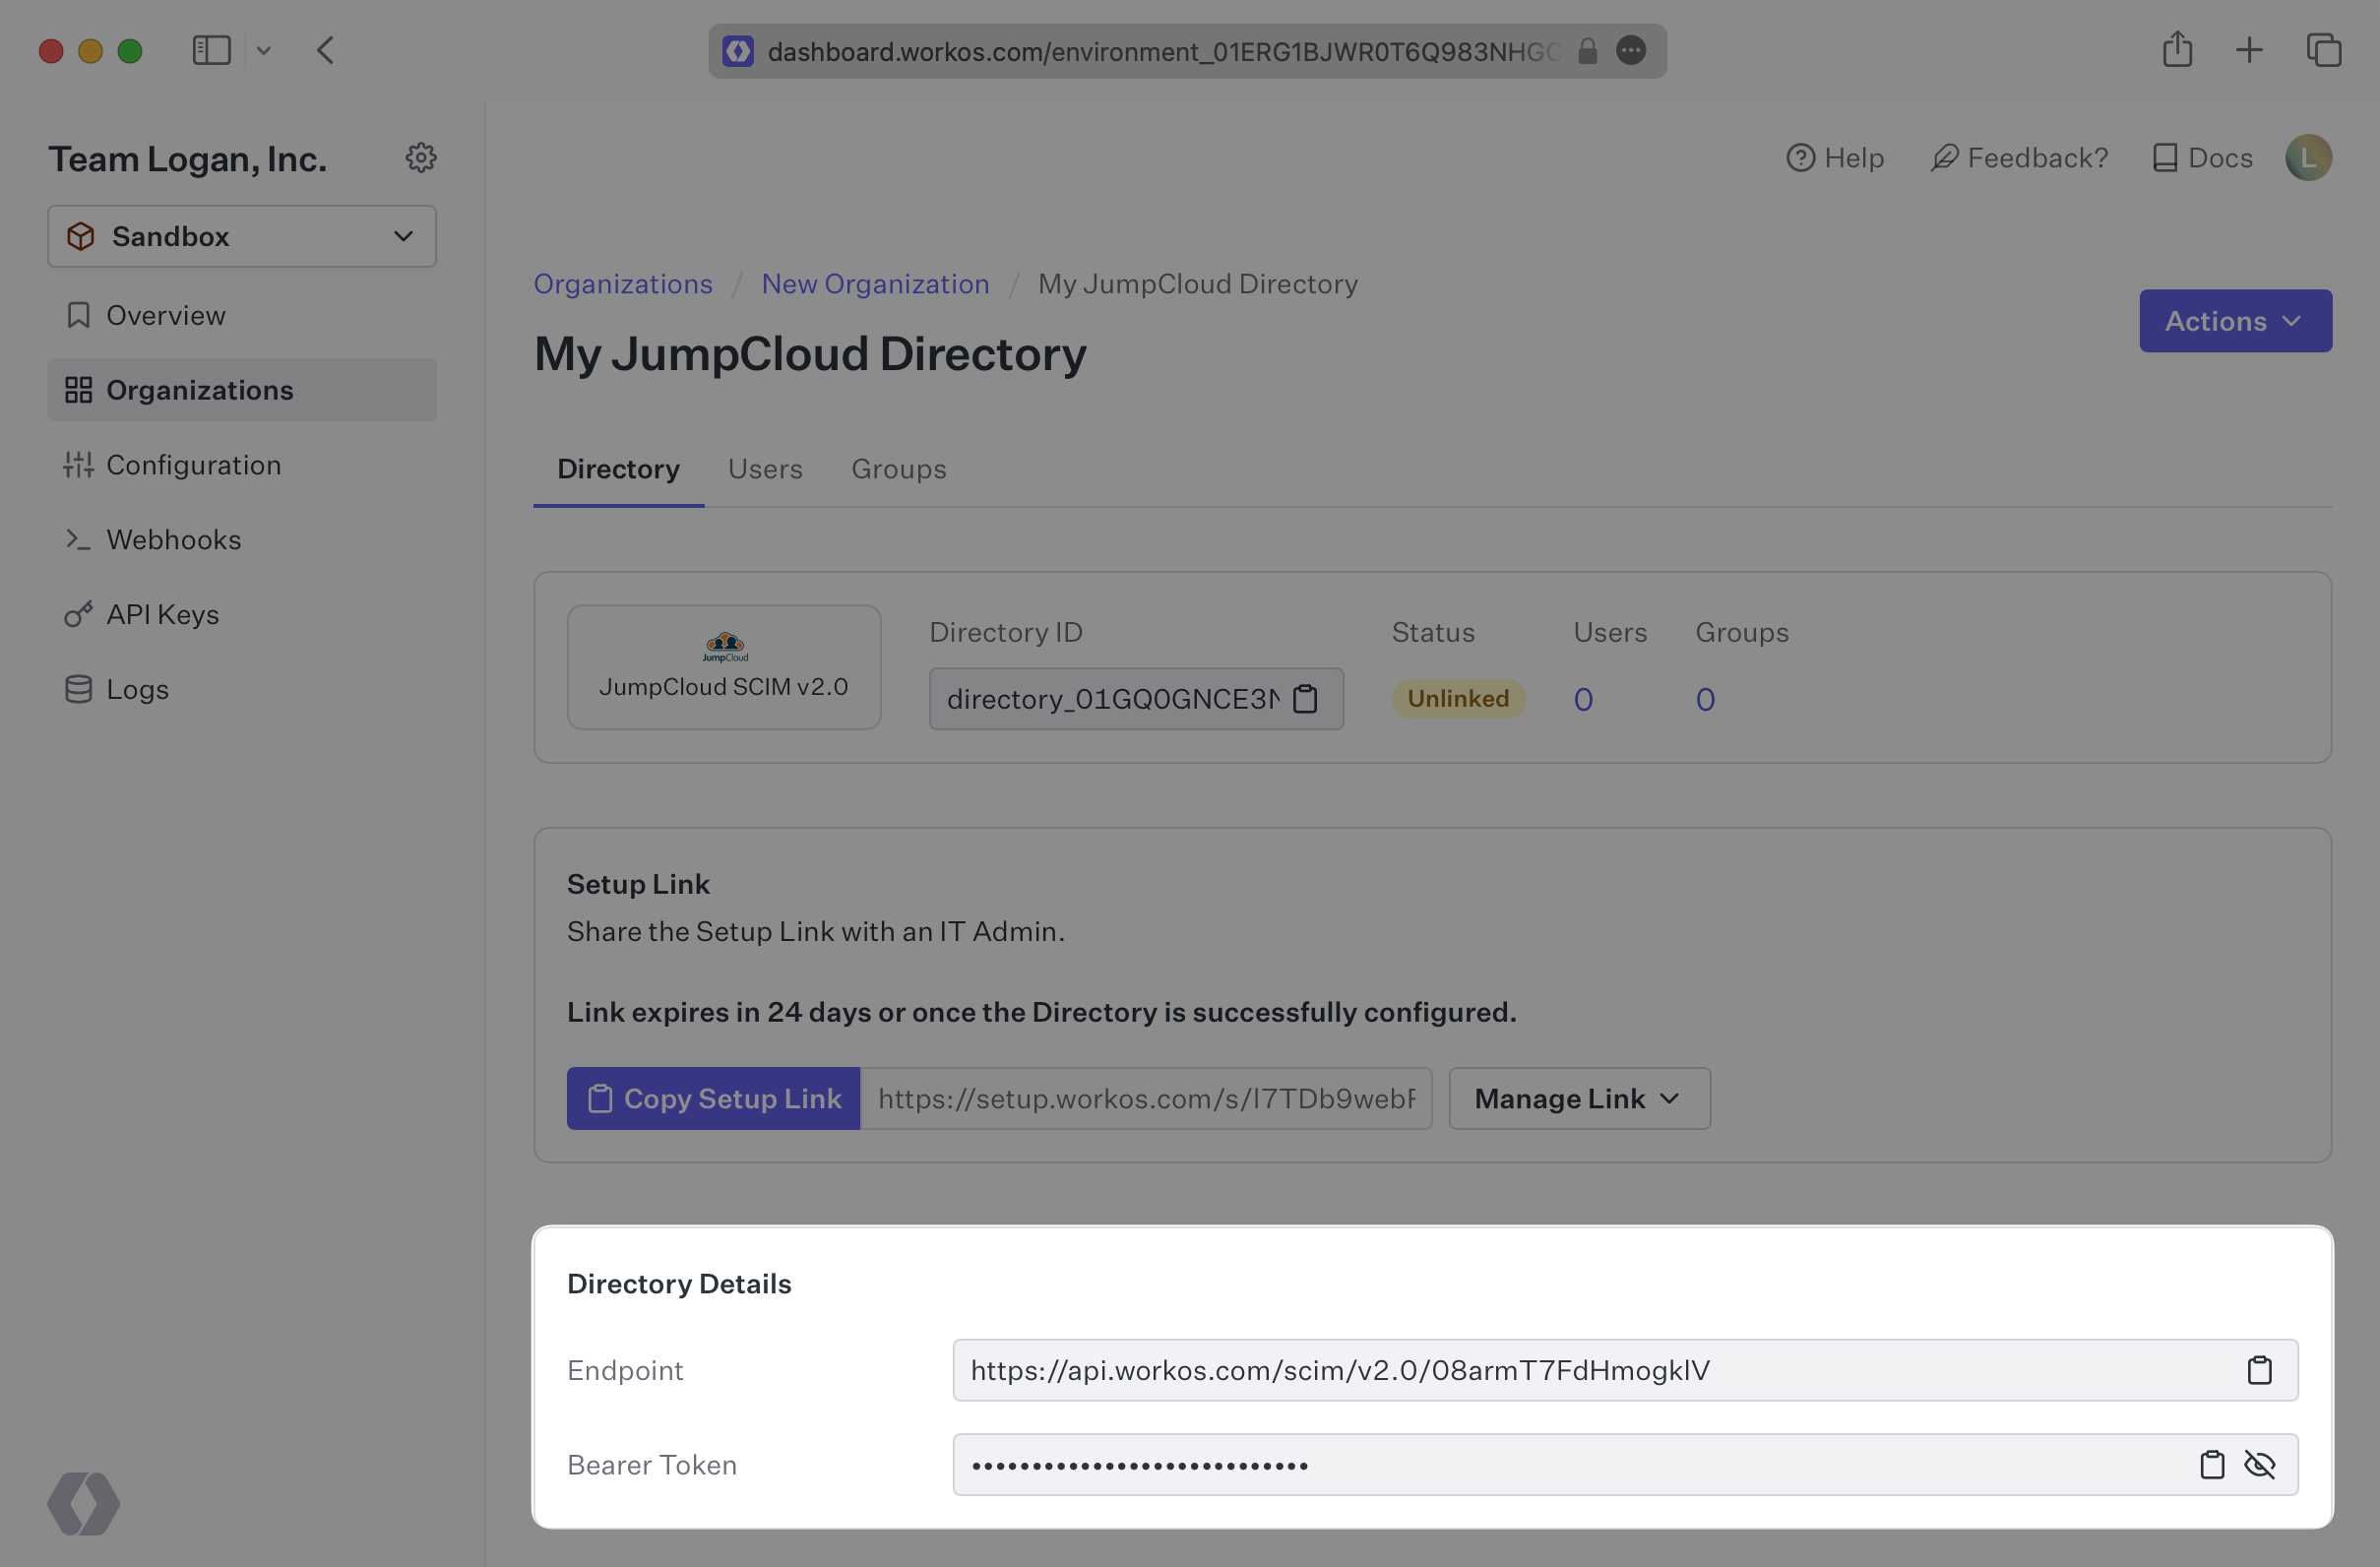 A screenshot highlighting the "Directory Details" for a JumpCloud directory in the WorkOS Dashboard.